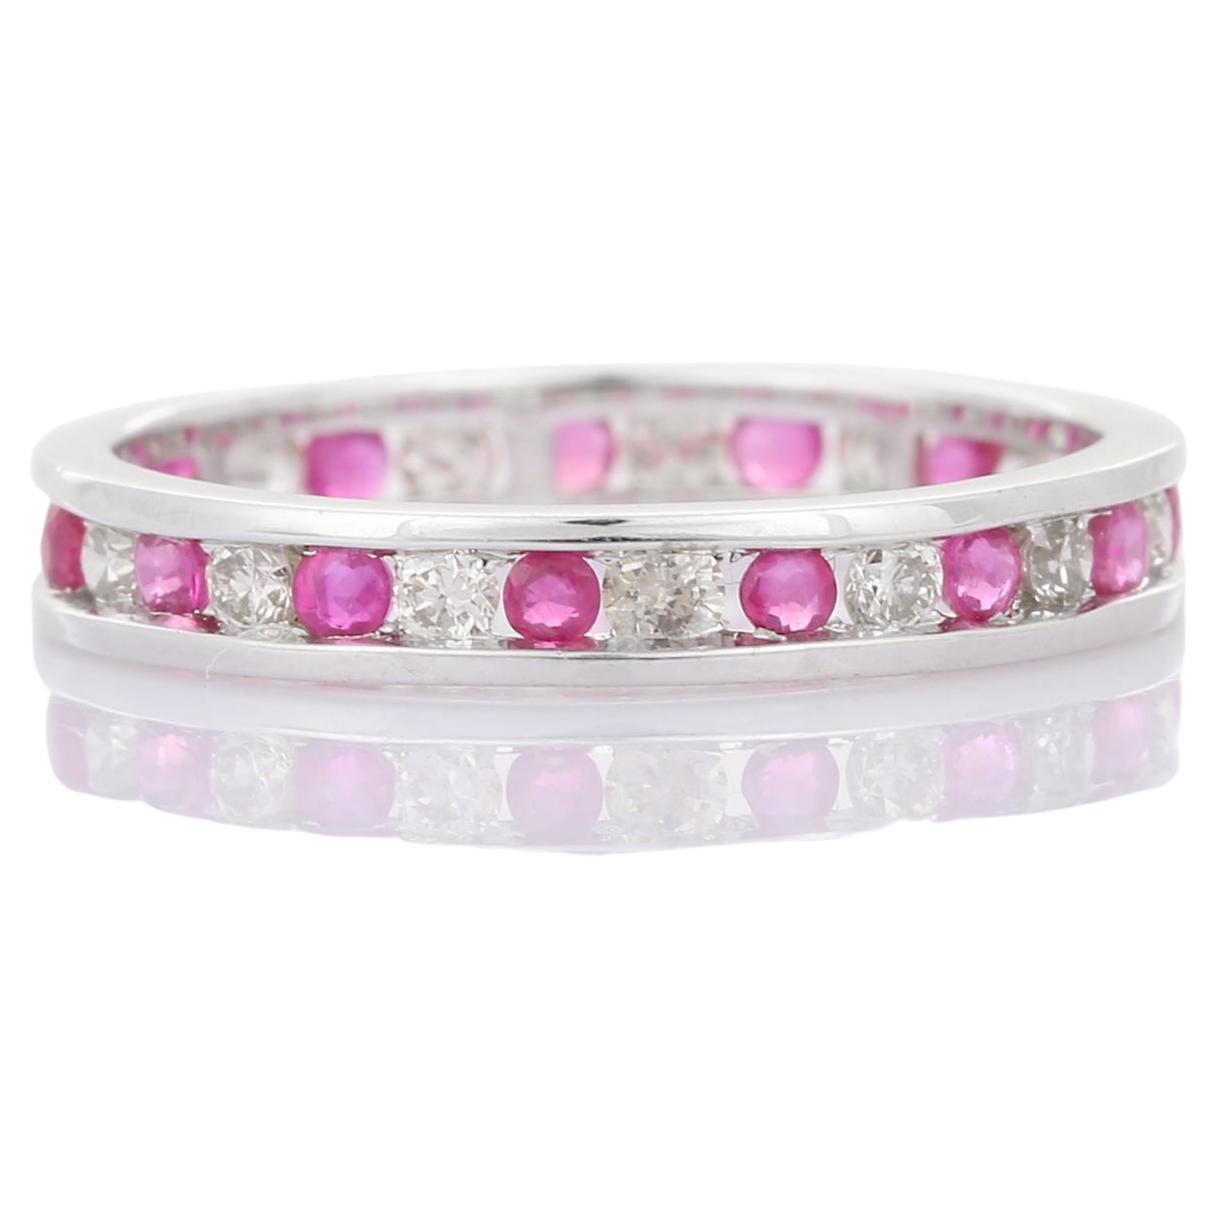 For Sale:  Eternity Band of Ruby and Diamond in 18 Karat White Gold